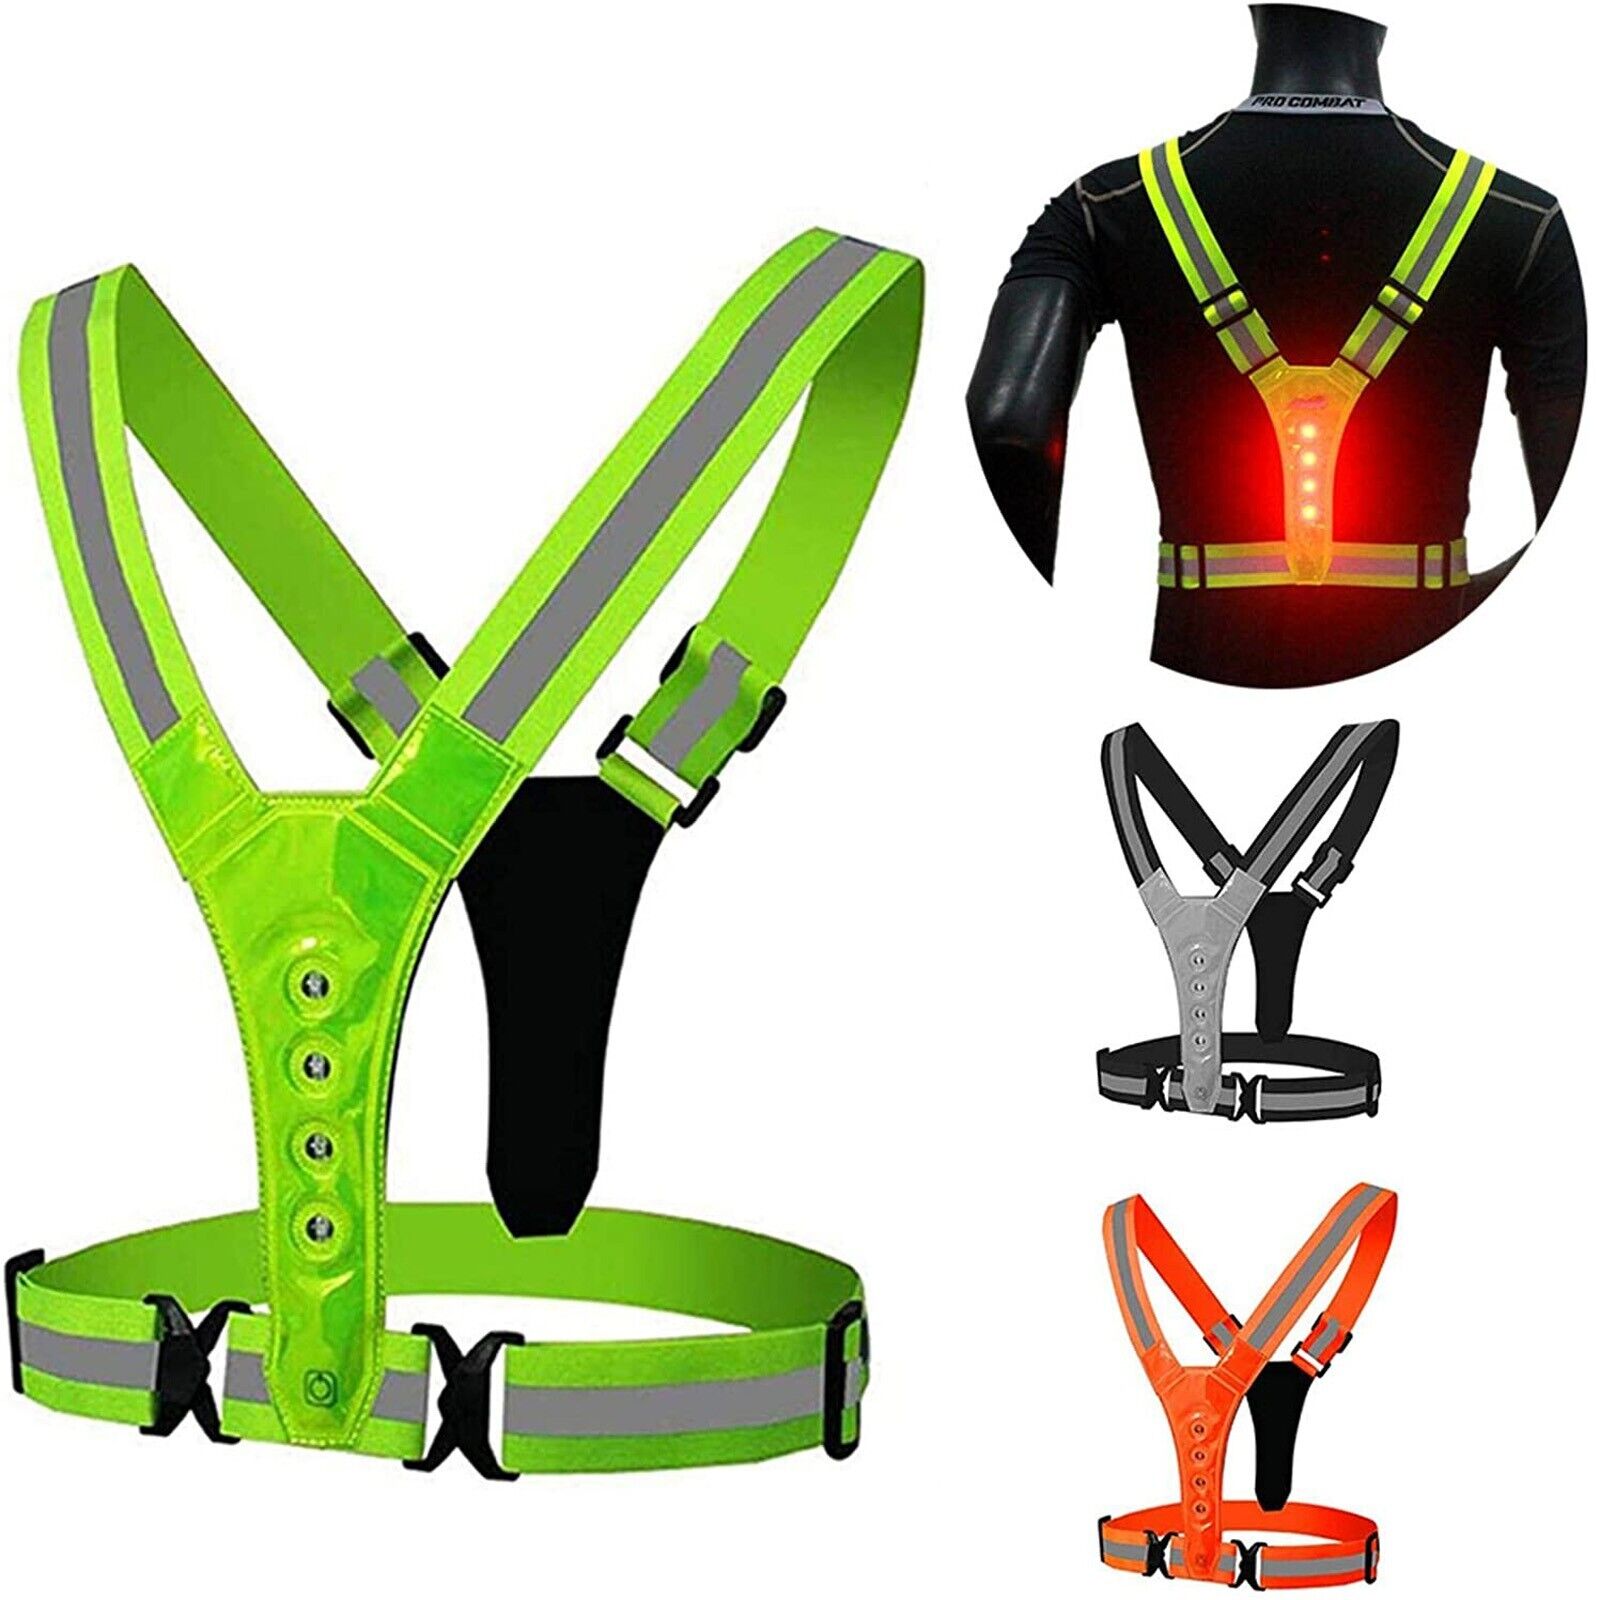 Visibility Neon Vest Reflective Belt Safety Vest Fit For Running Cycling Sports